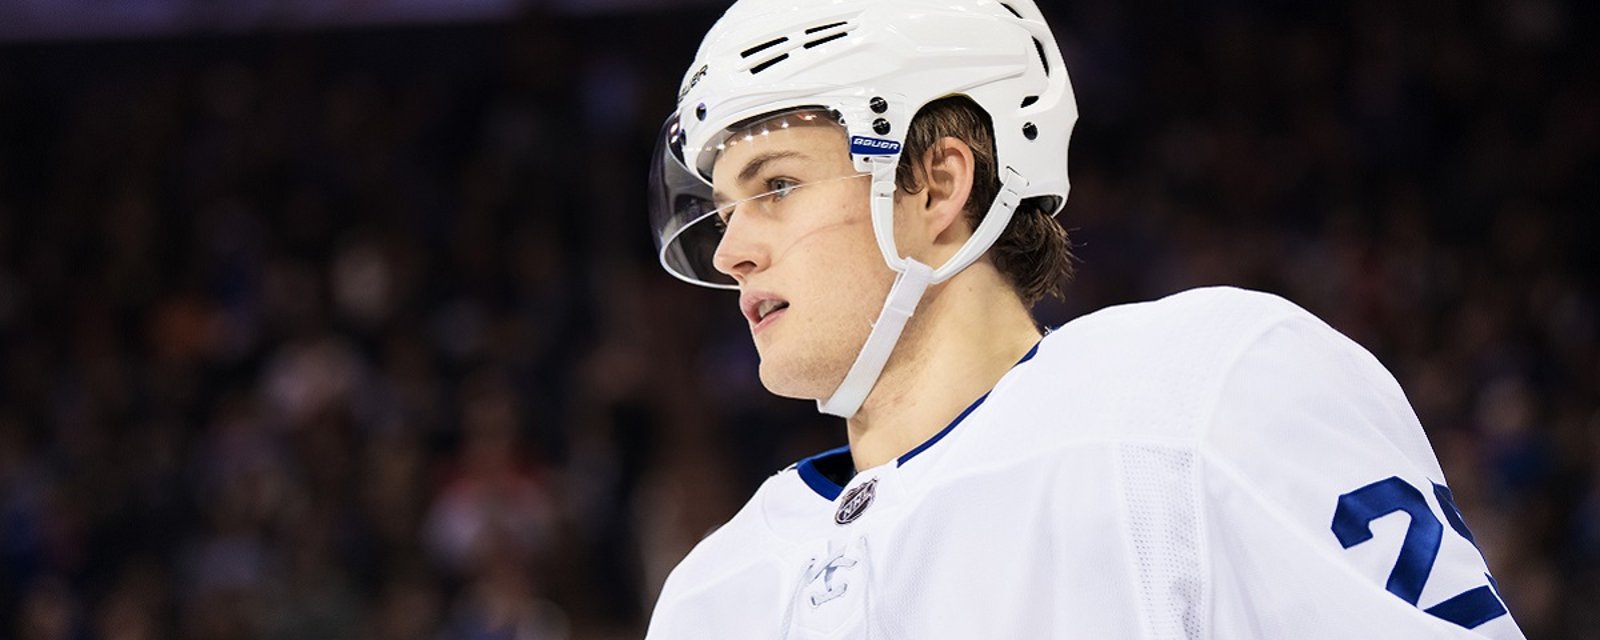 NBC reports that Nylander has signed a new deal but quickly removes report.